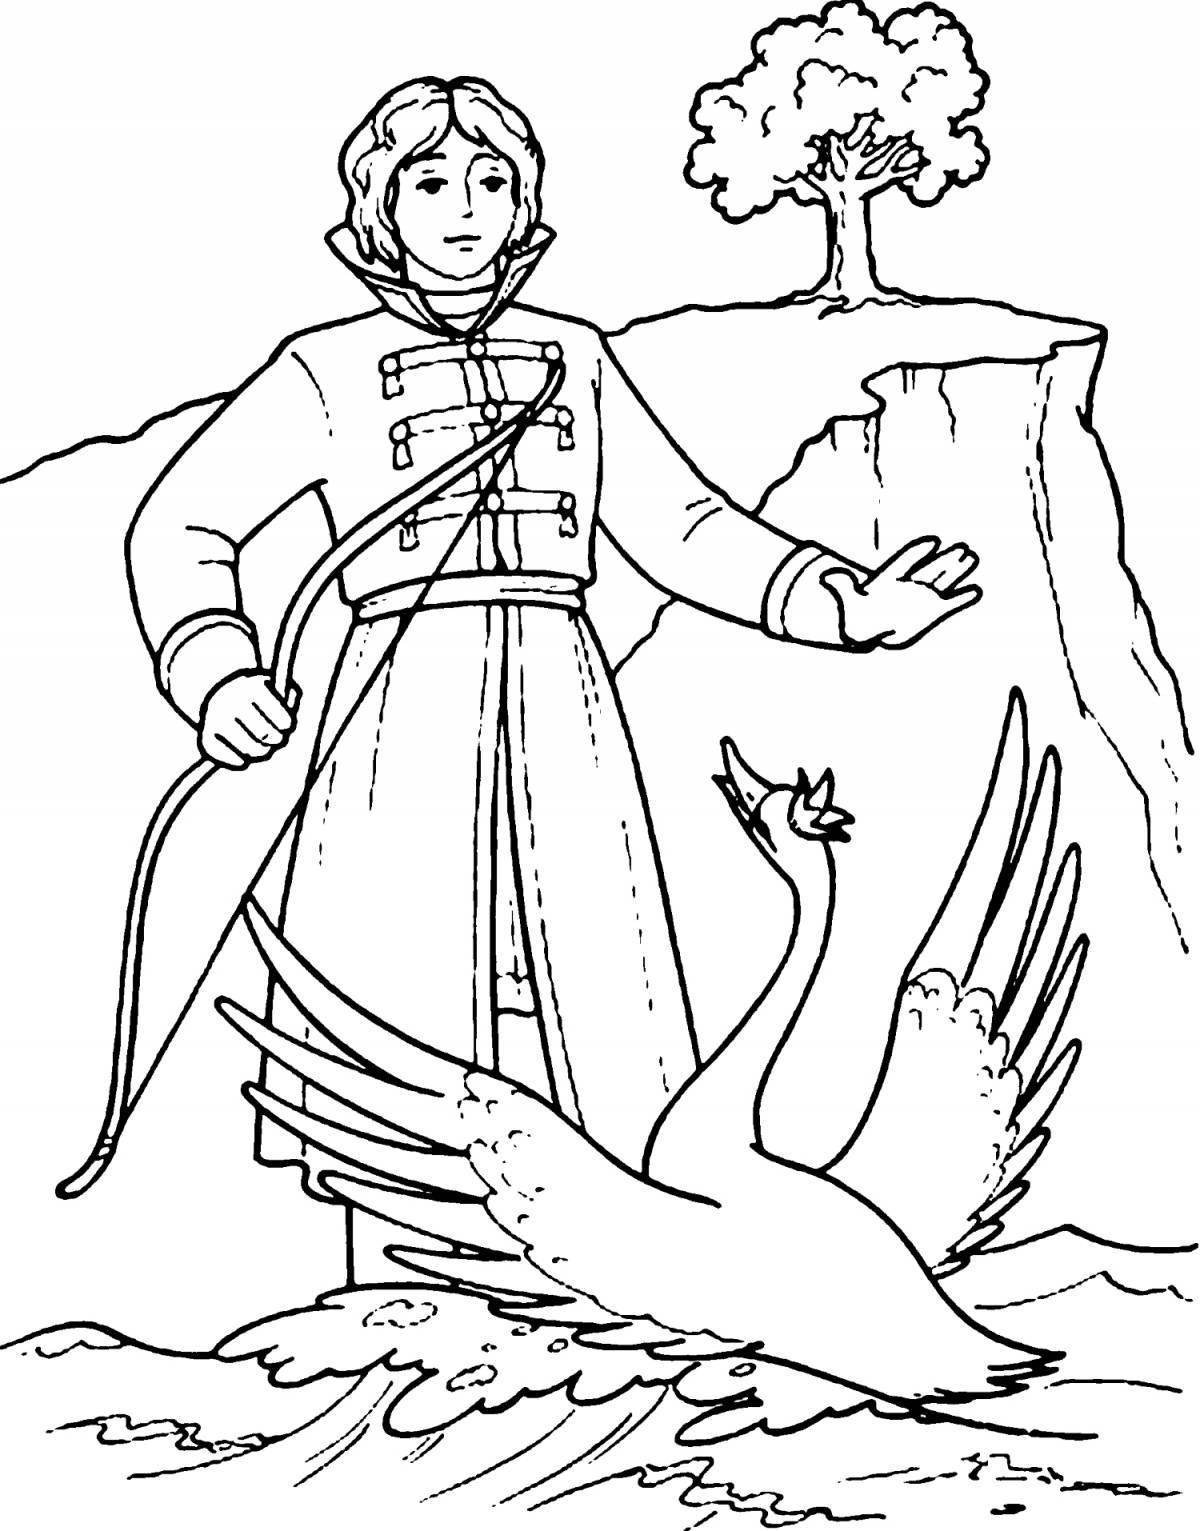 Crazy Pushkin coloring pages